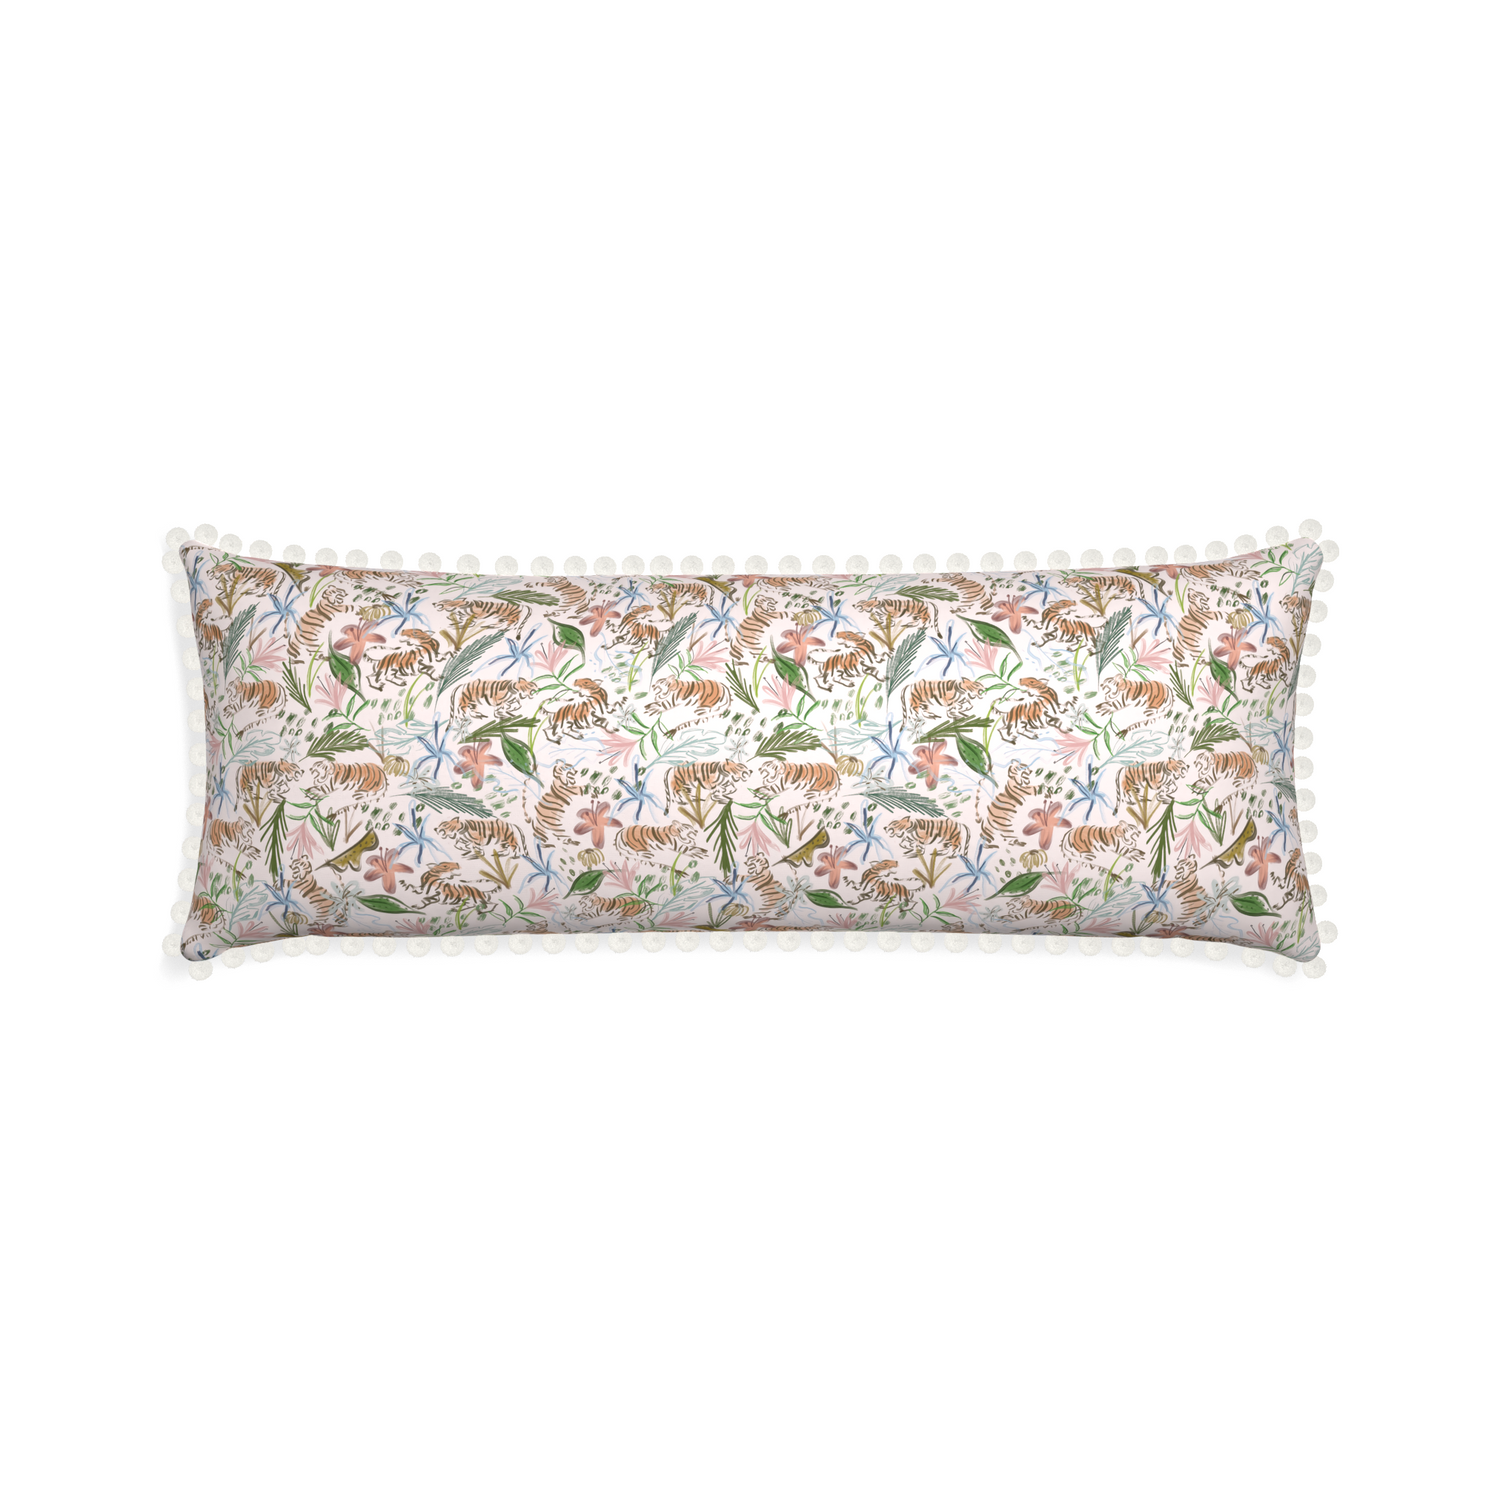 Xl-lumbar frida pink custom pink chinoiserie tigerpillow with snow pom pom on white background